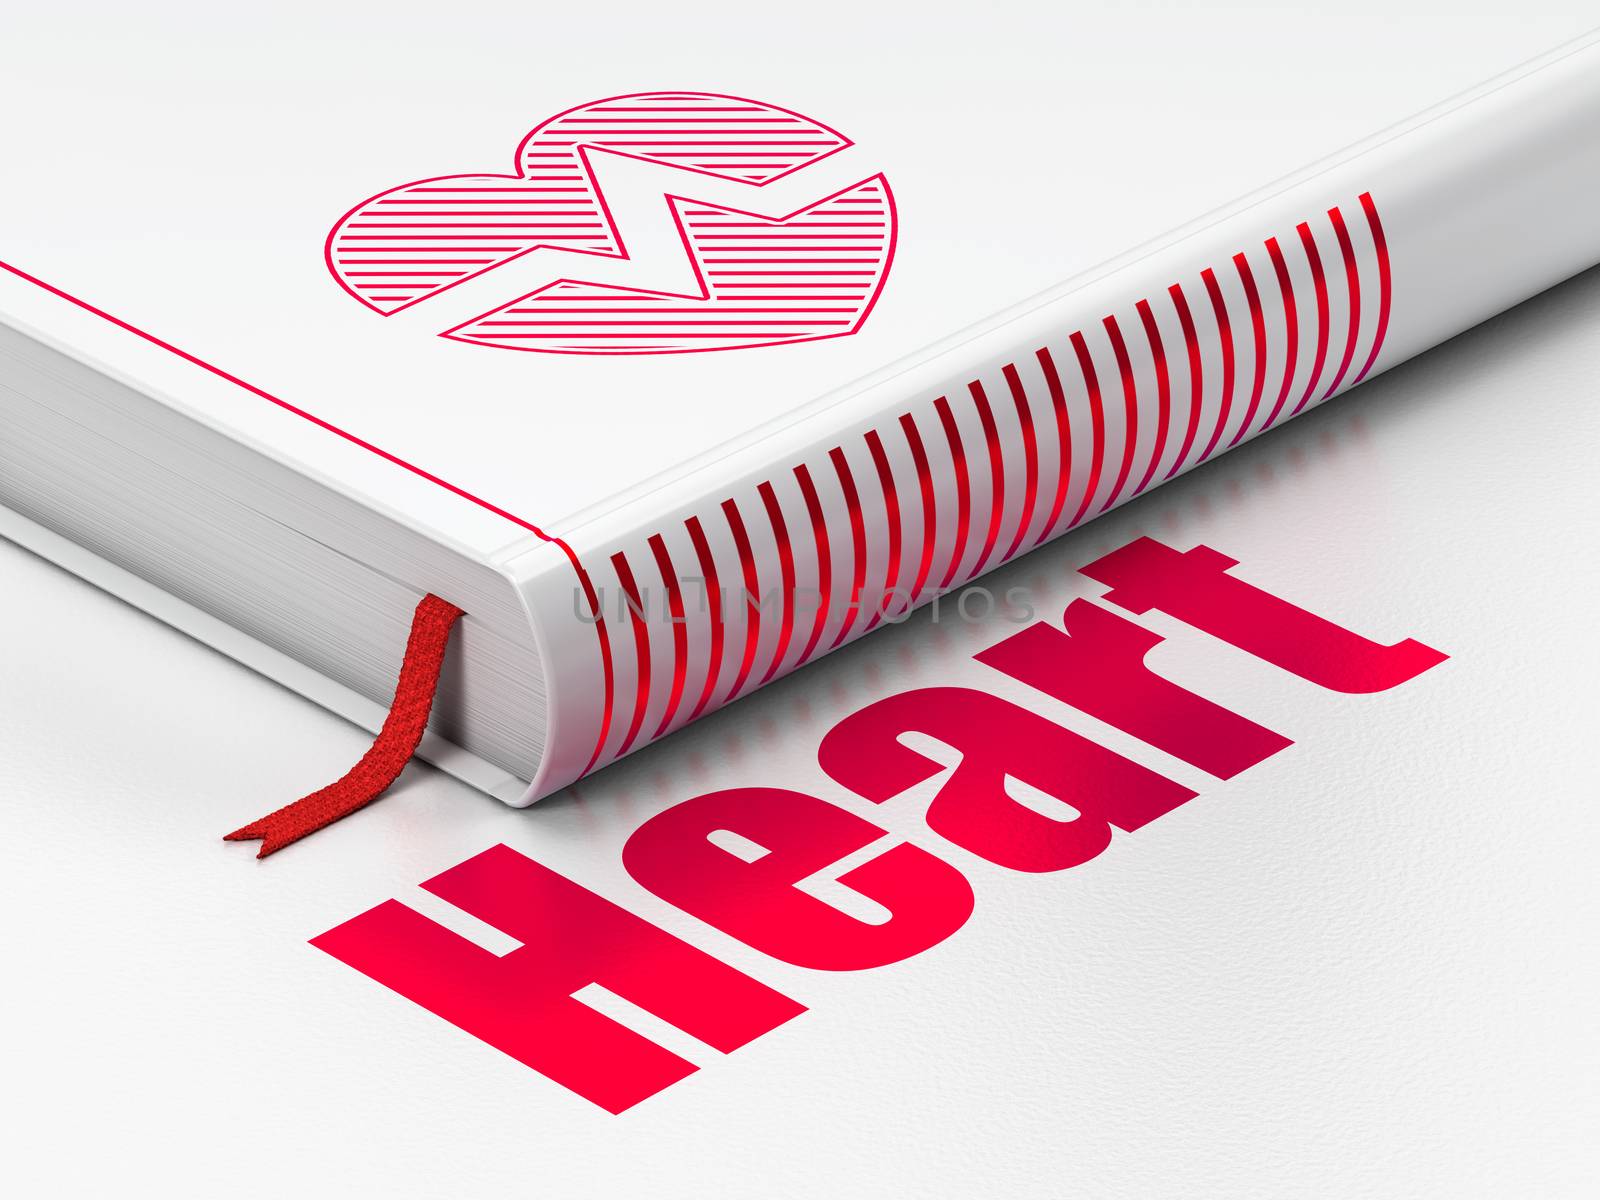 Healthcare concept: closed book with Red Heart icon and text Heart on floor, white background, 3D rendering